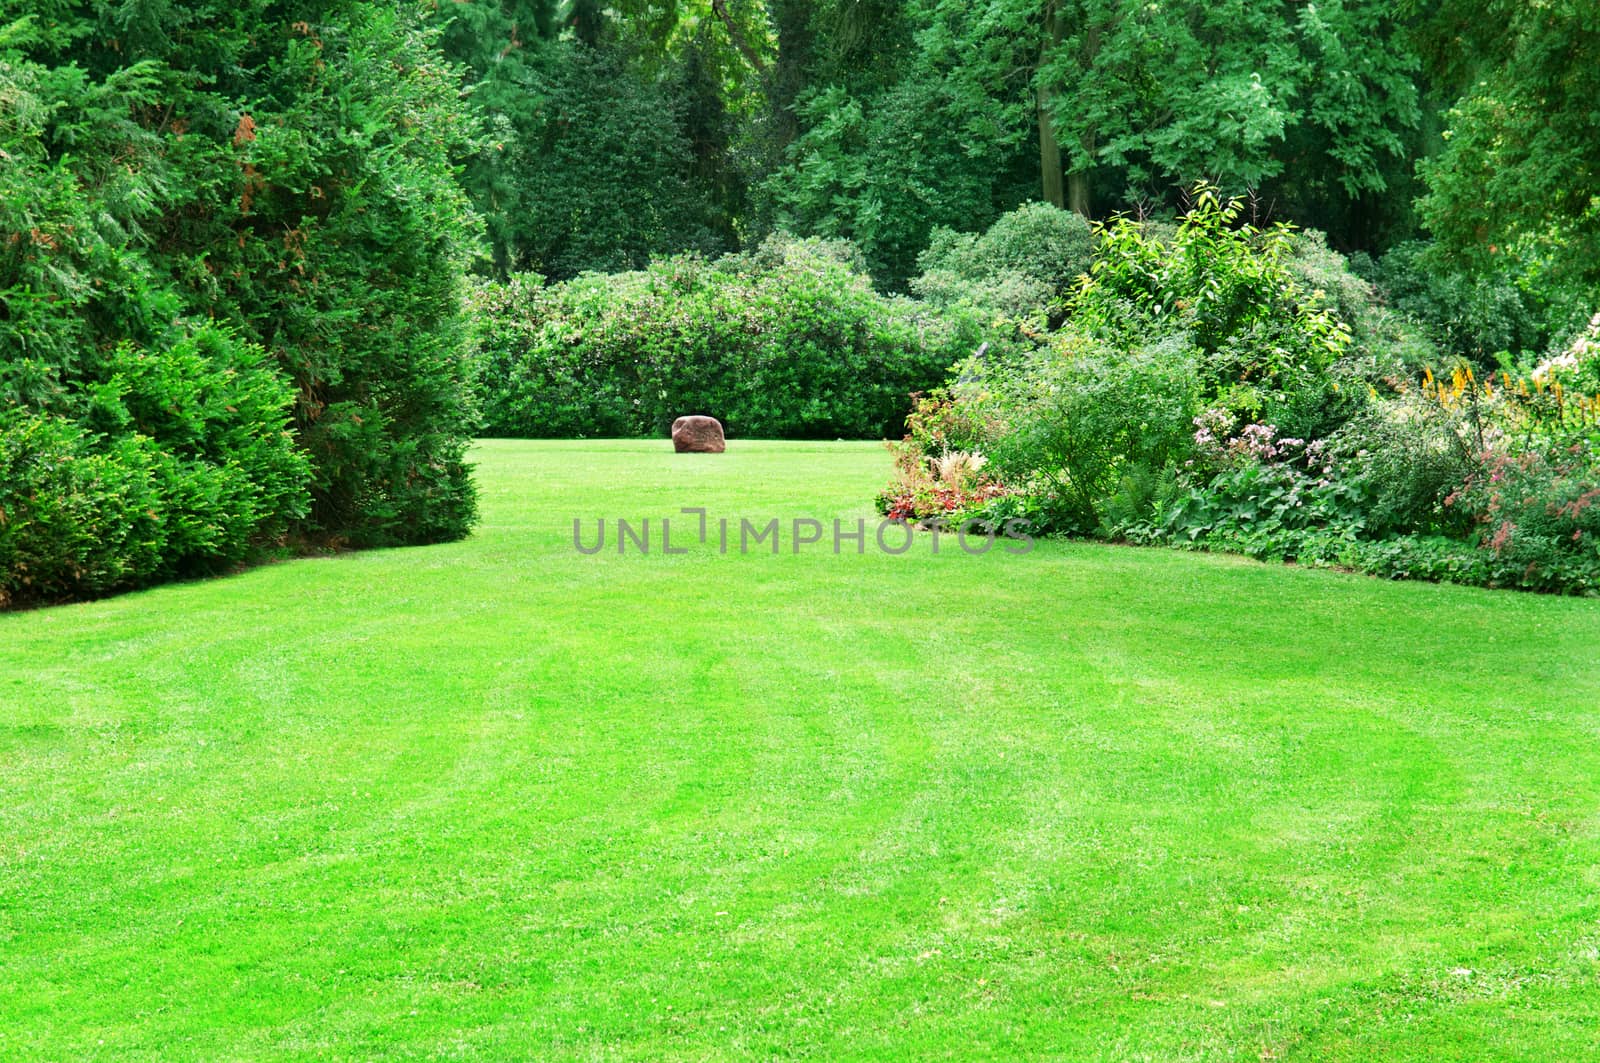 beautiful summer garden with large green lawns